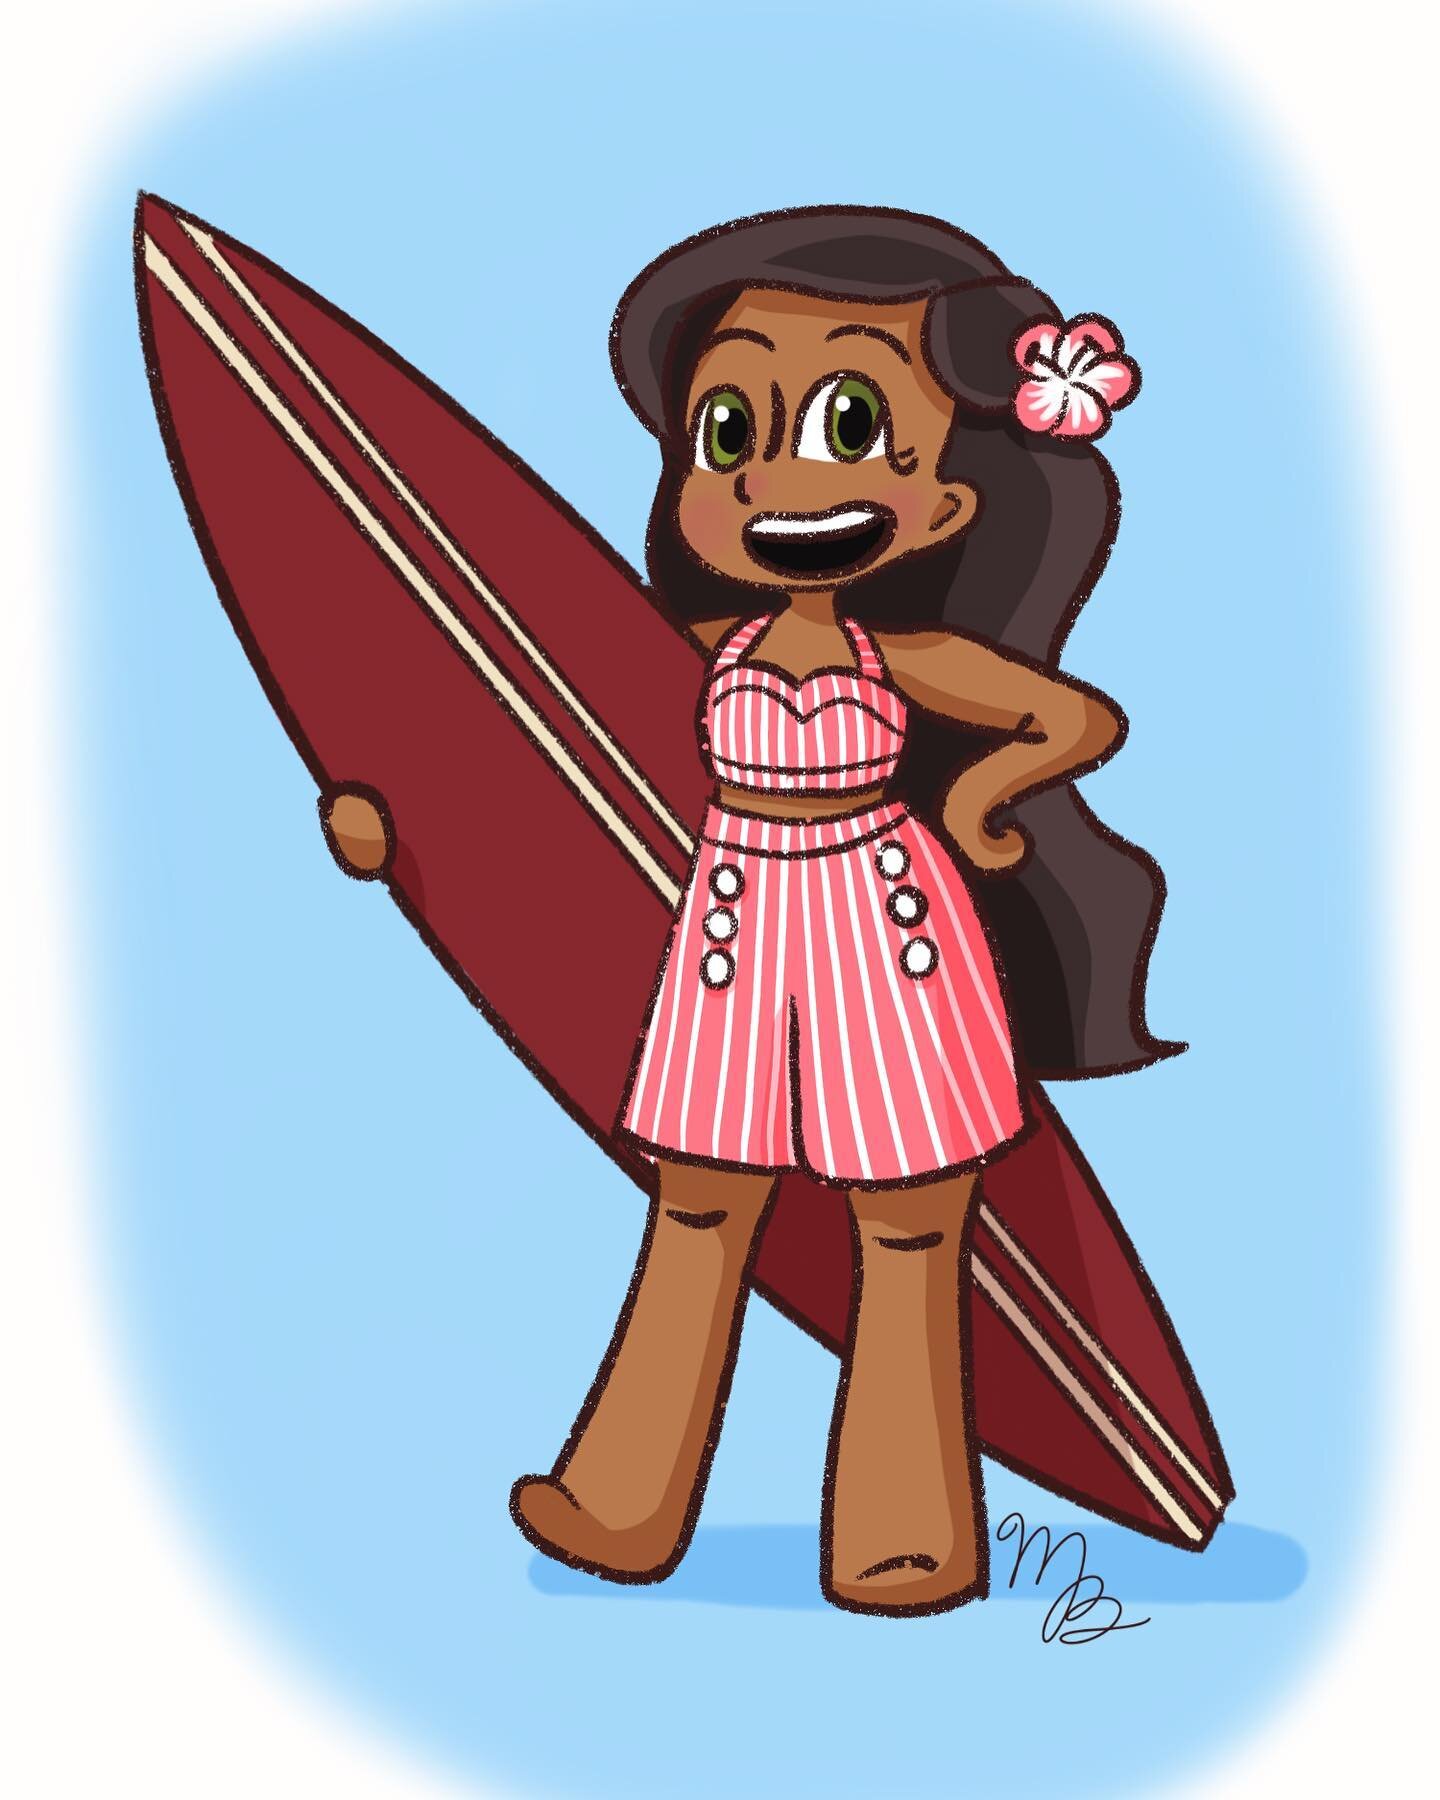 Do you like Nanea&rsquo;s old swimsuit or new swimsuit better? I honestly love them both! The vintage style of swimsuits are far superior to the modern style, in my opinion. But if I had to choose, I&rsquo;d pick her pink striped suit. I love the cut